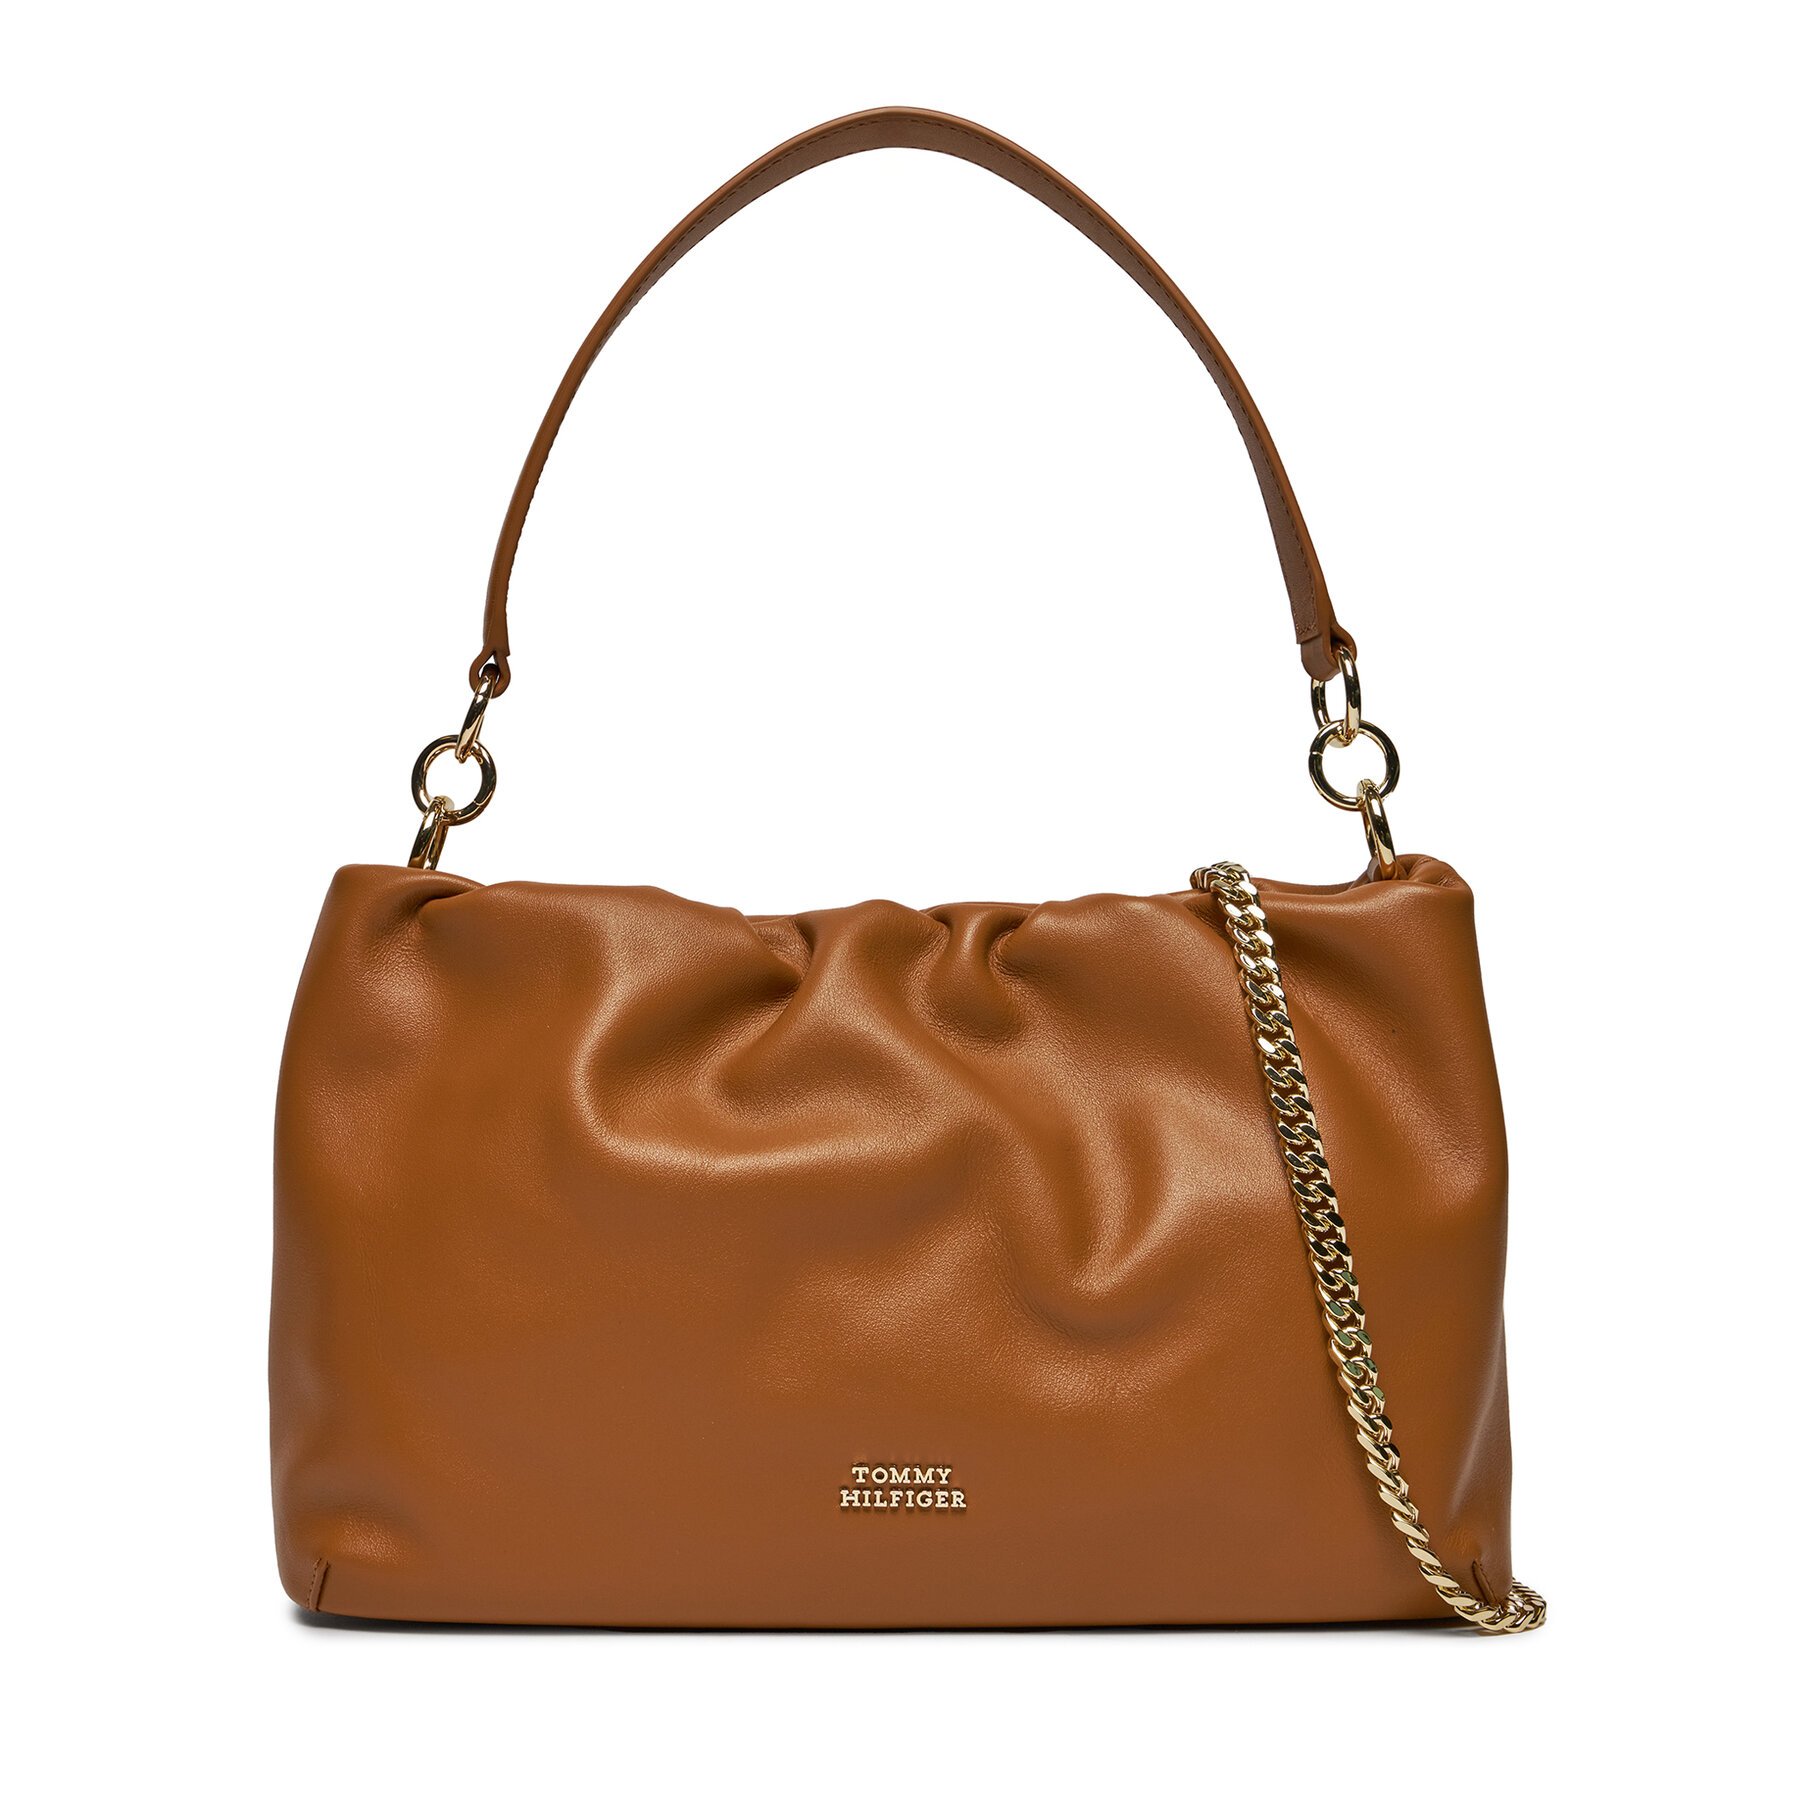 Tommy Hilfiger – Sac à main Tommy Hilfiger Th Luxe Soft Leather Shoulder AW0AW16203 Tan 0HD à 175 € chez Chaussures.fr